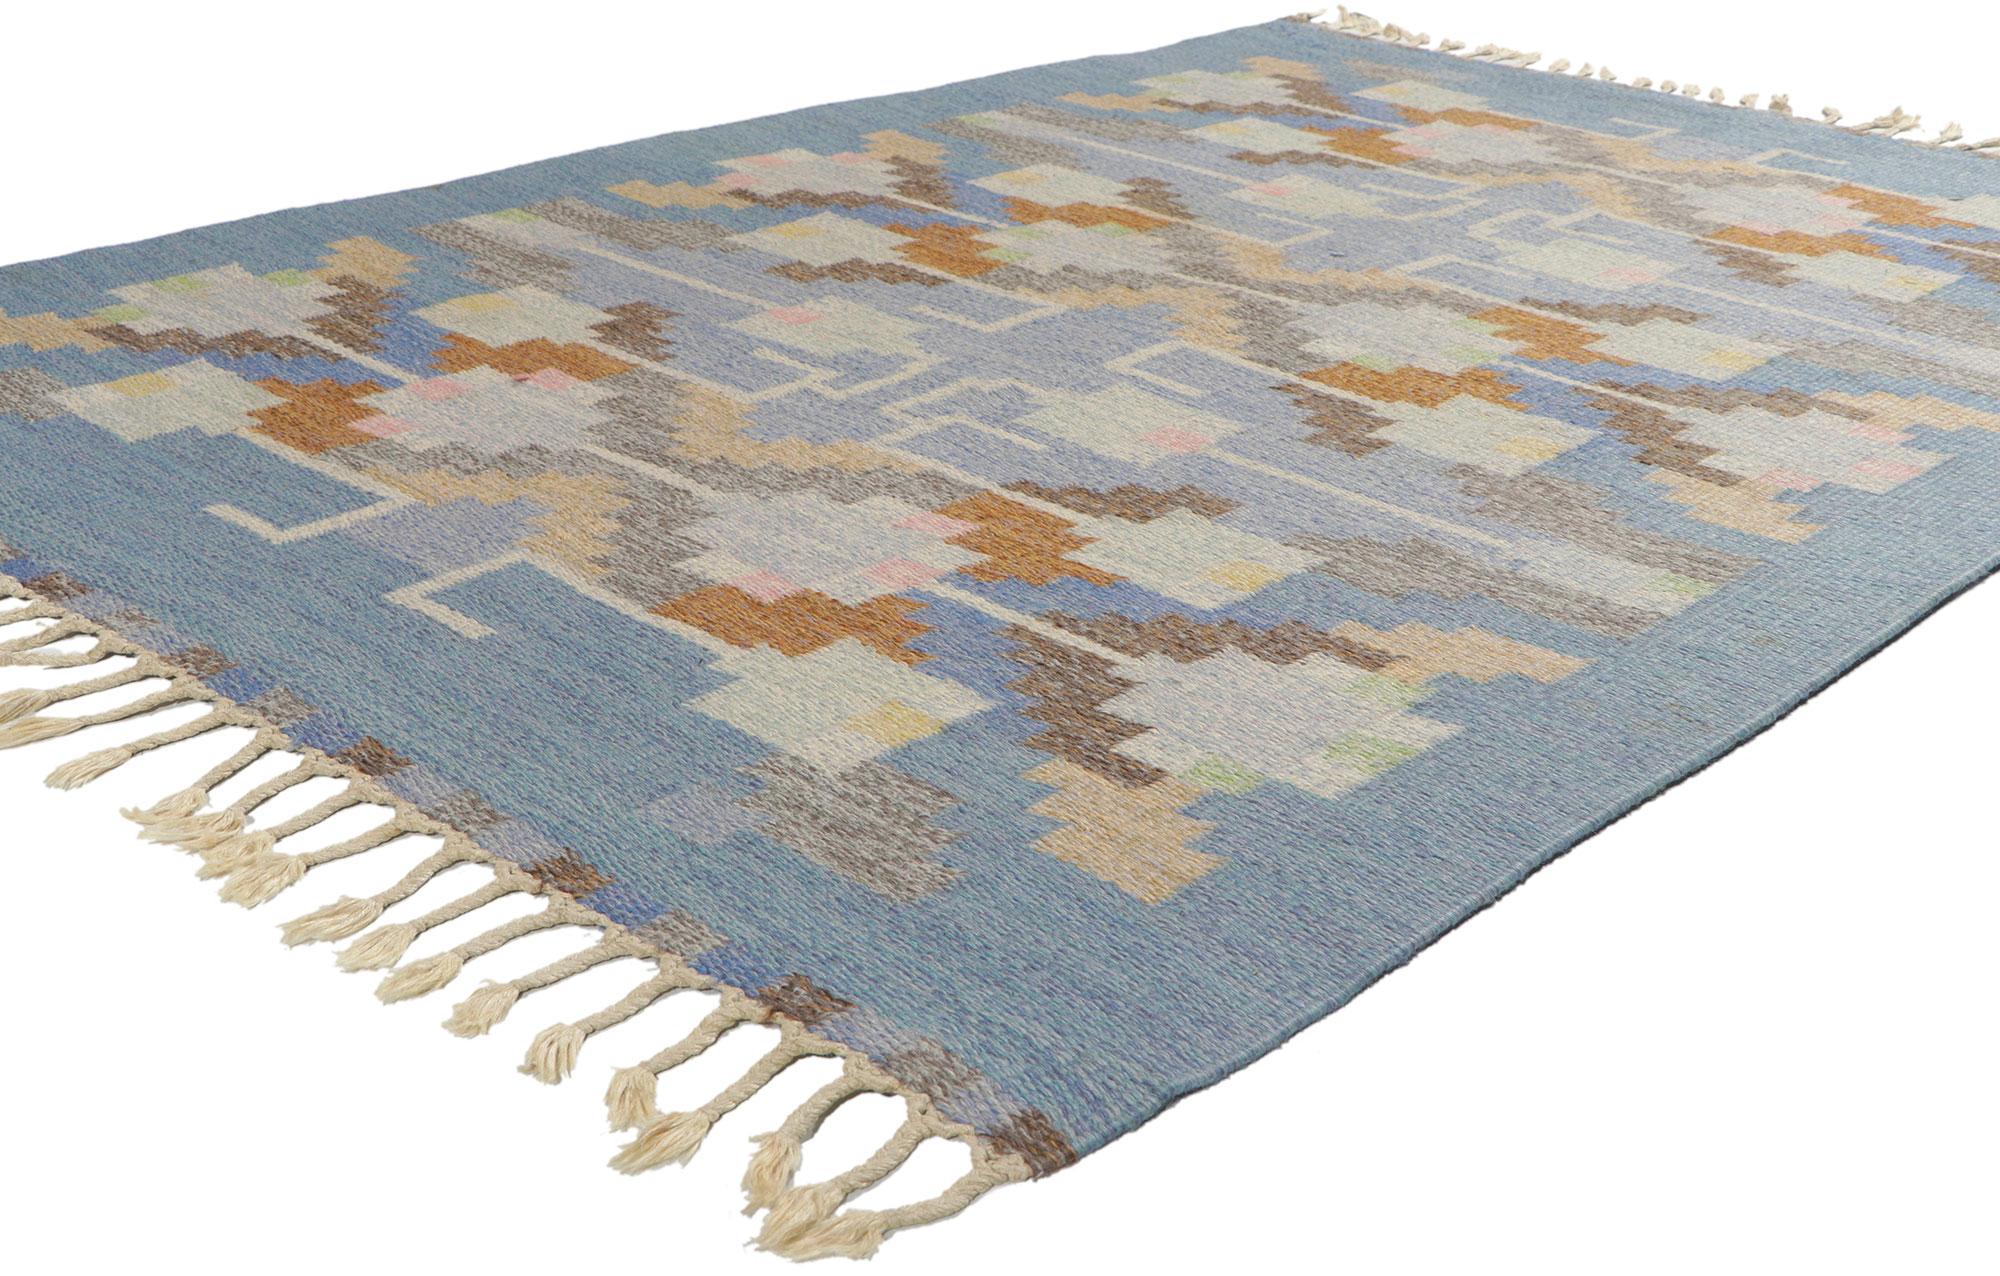 78497 Vintage Swedish Rollakan Rug by Ingegerd Silow, 04'06 x 06'07. Emanating Scandinavian Modern style with incredible detail and texture, this handwoven Swedish rollakan rug is a captivating vision of woven beauty. The eye-catching geometric